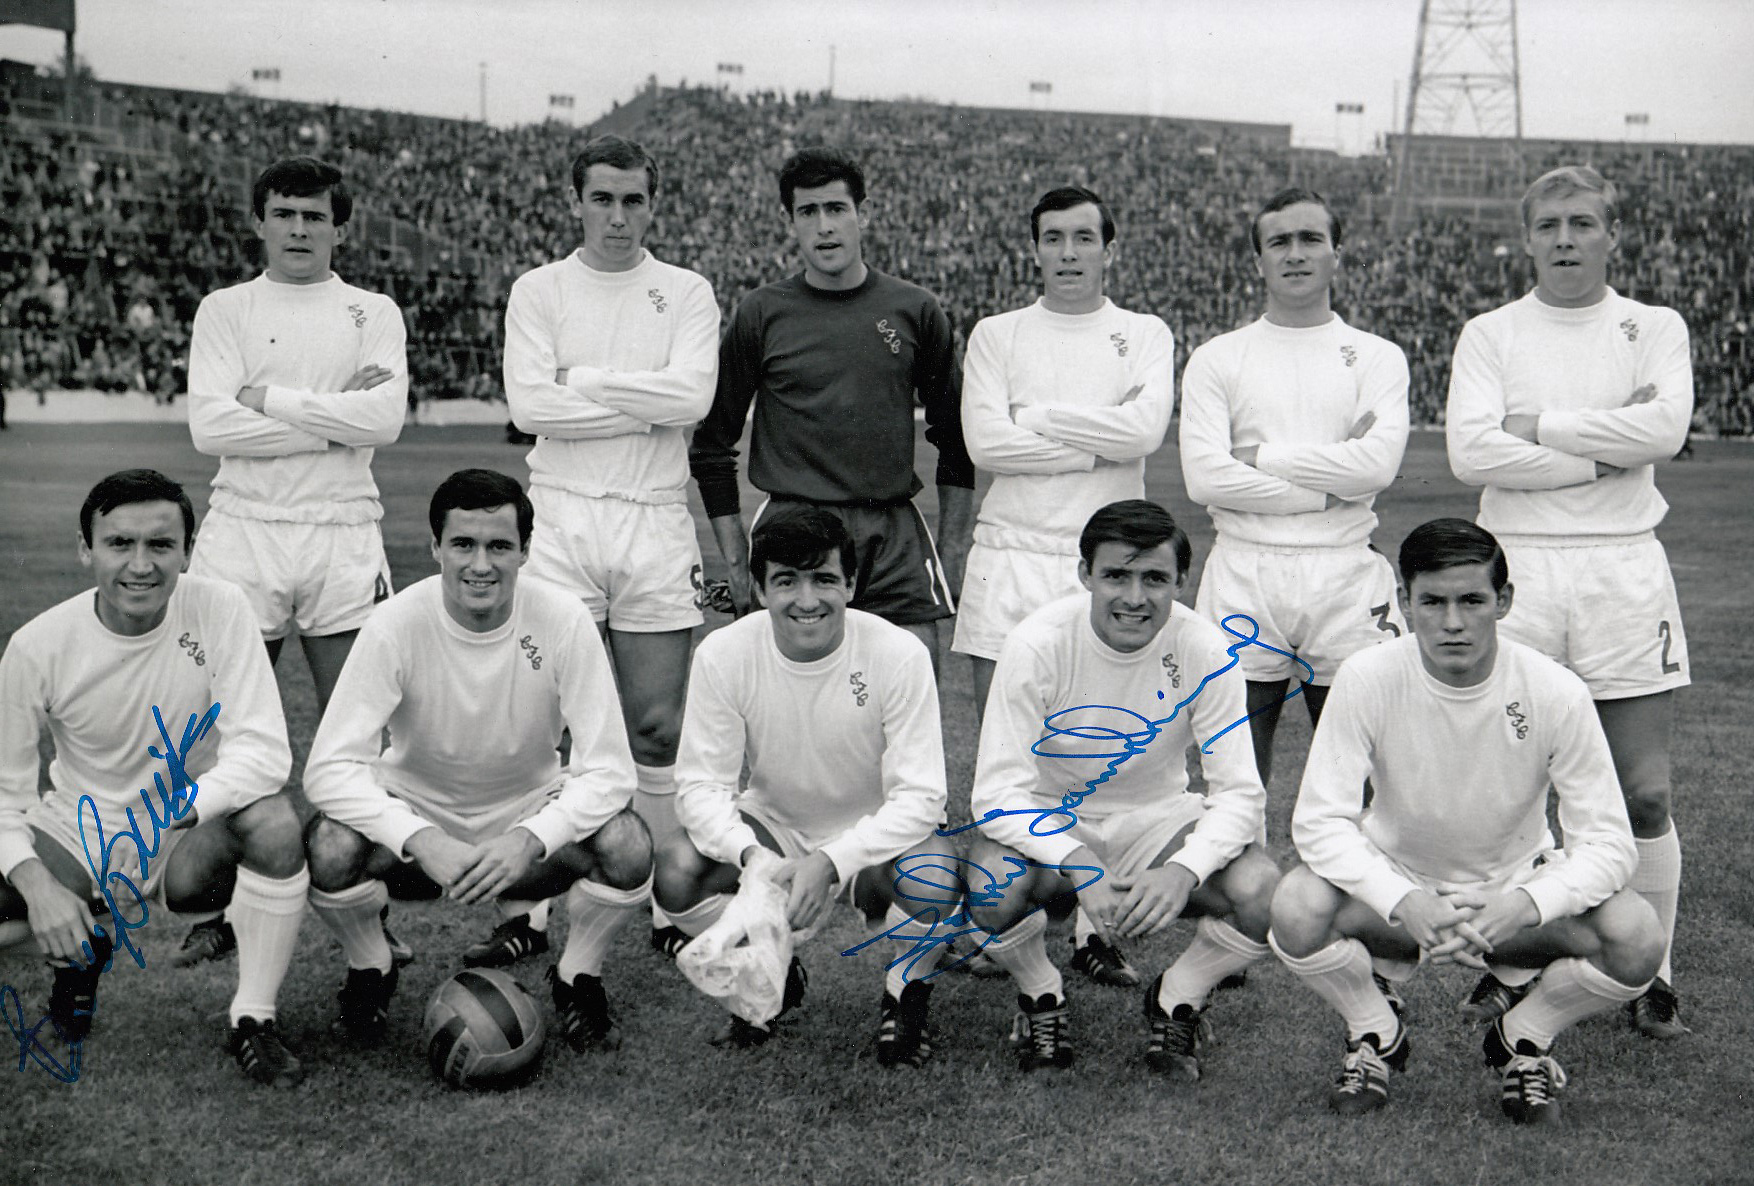 Autographed CHELSEA 12 x 8 photo - B/W, depicting players posing for a team photo prior to a